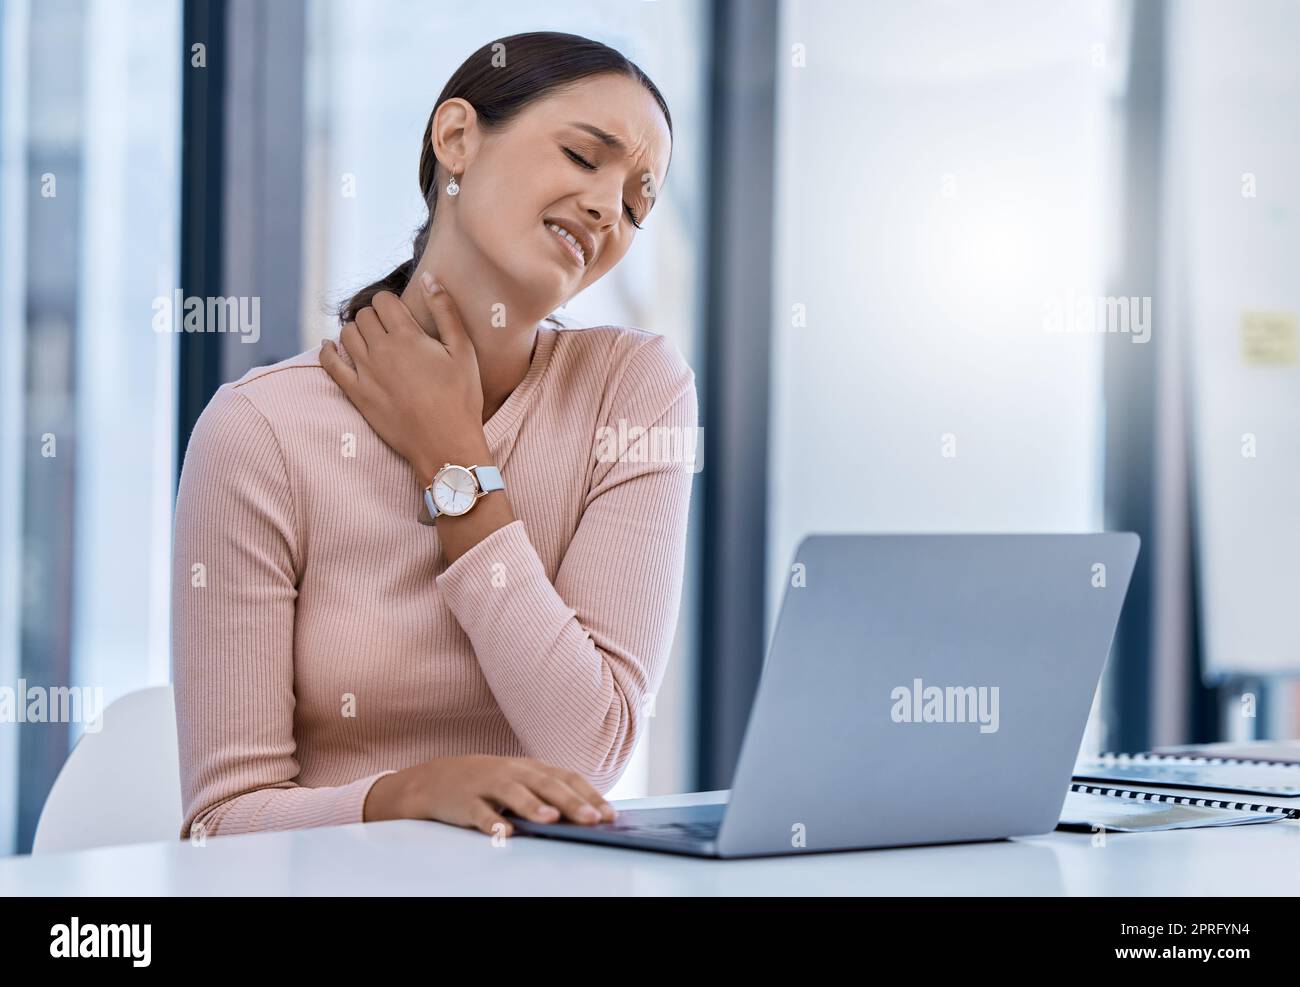 Stress woman suffering from neck pain working on a laptop in a modern office. Corporate professional with bad posture and an injury. Business SEO worker with discomfort from long hours at a desk Stock Photo